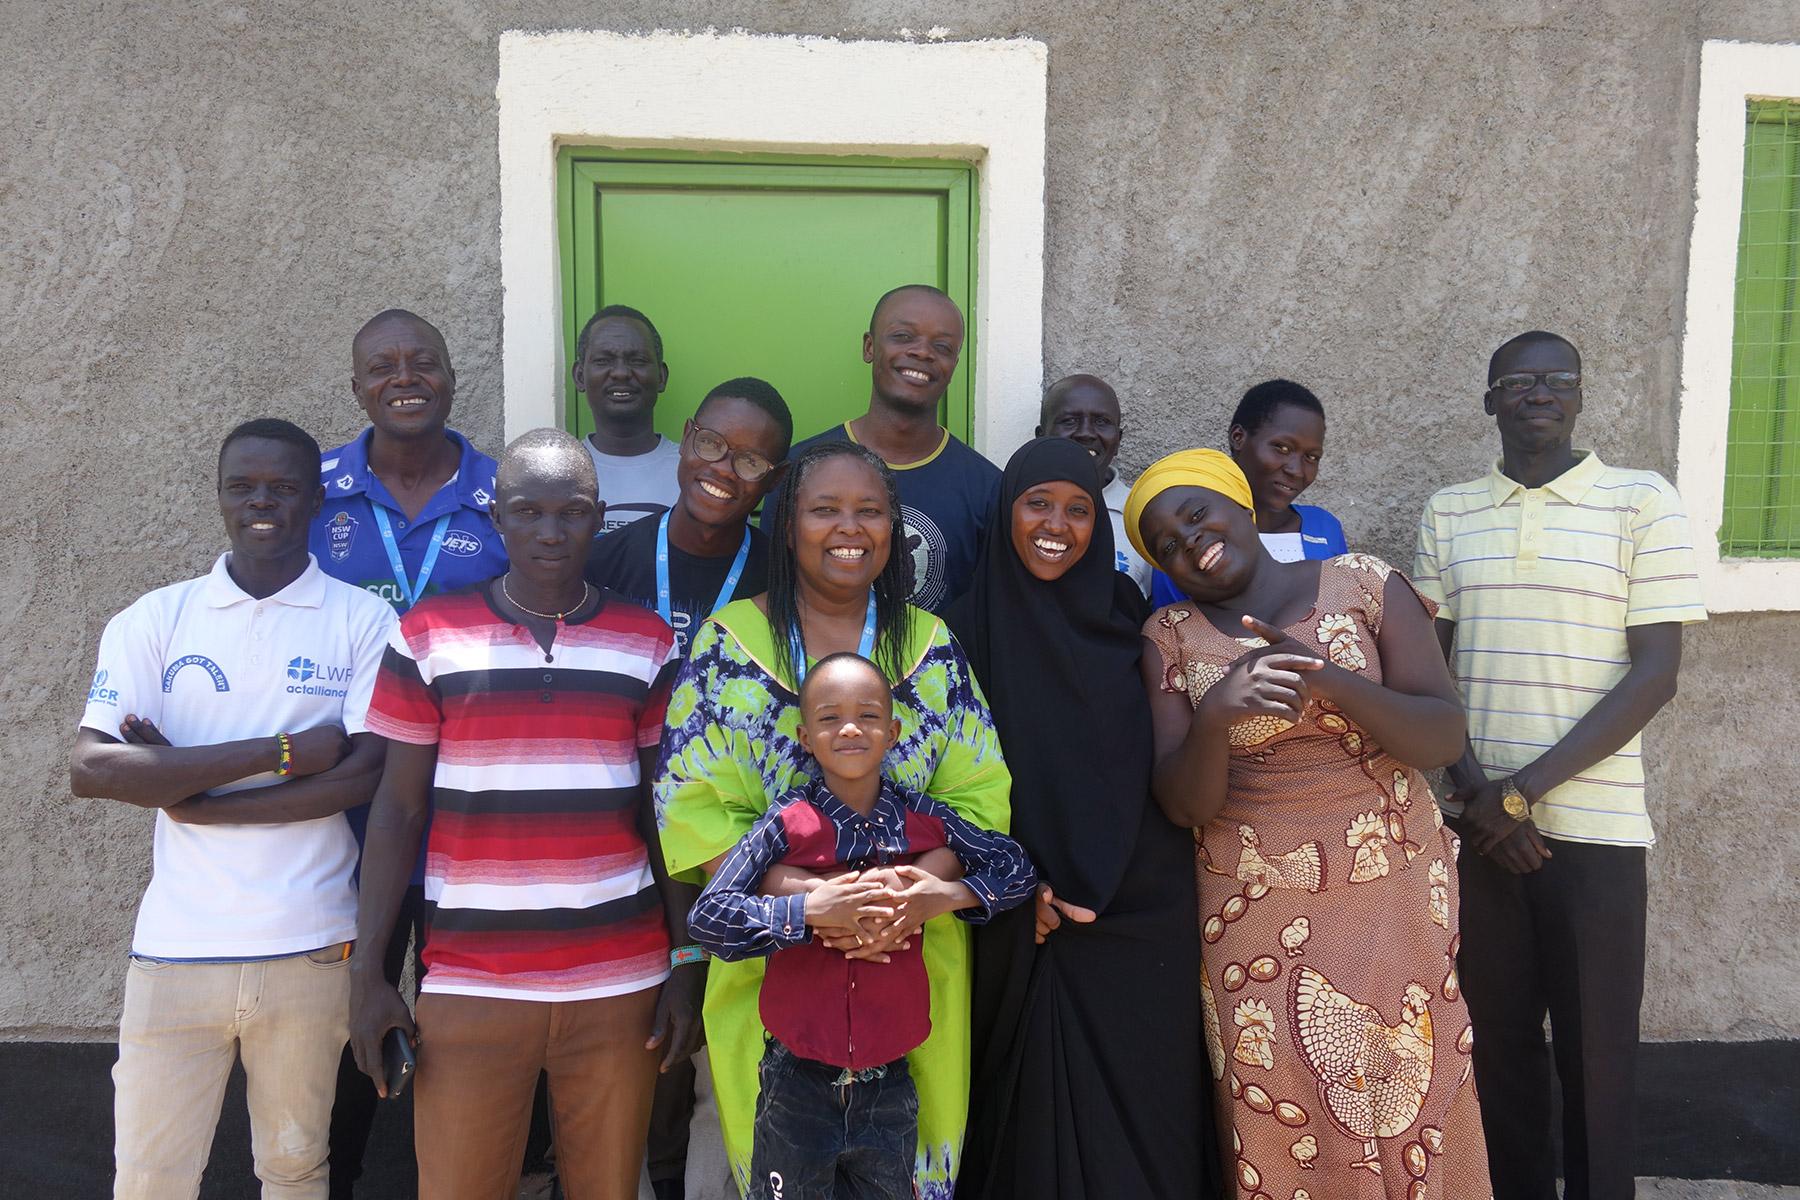 Residents from Kakuma refugee camp in northwest Kenya pose for a photo after taking part in an LWF-run workshop to write poems for the âI am Hopeâ publication. Jackline Irankunda is pictured in the front row, furthest to the right. Photo: LWF/O. Schnoebelen